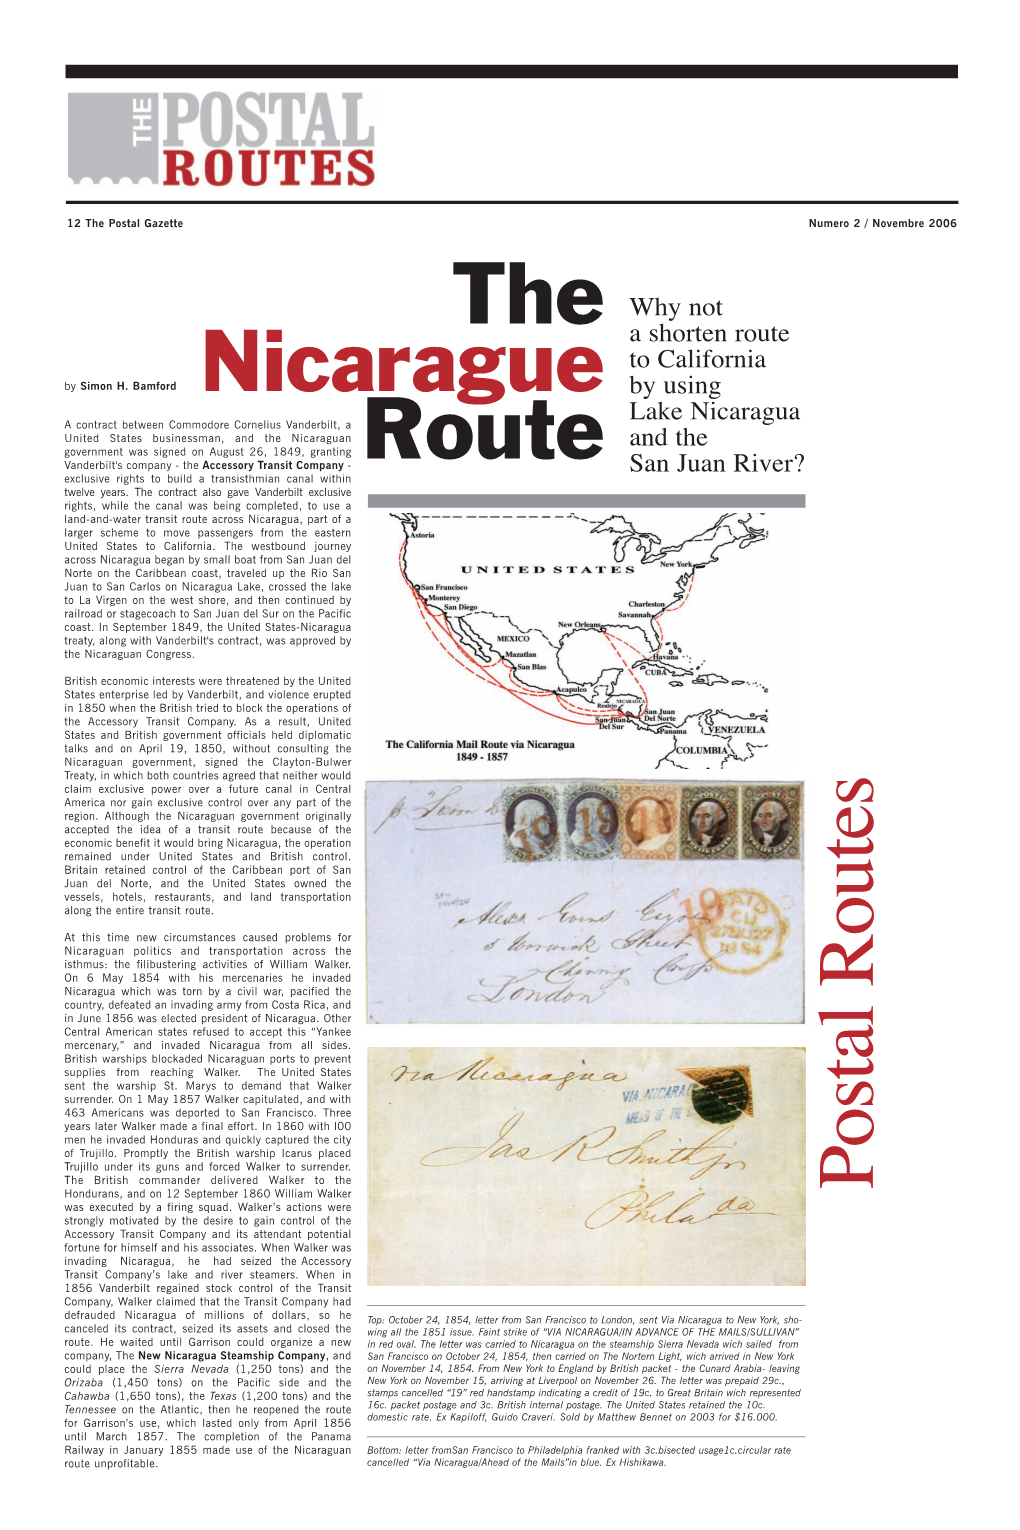 Why Not a Shorten Route to California by Using Lake Nicaragua and The